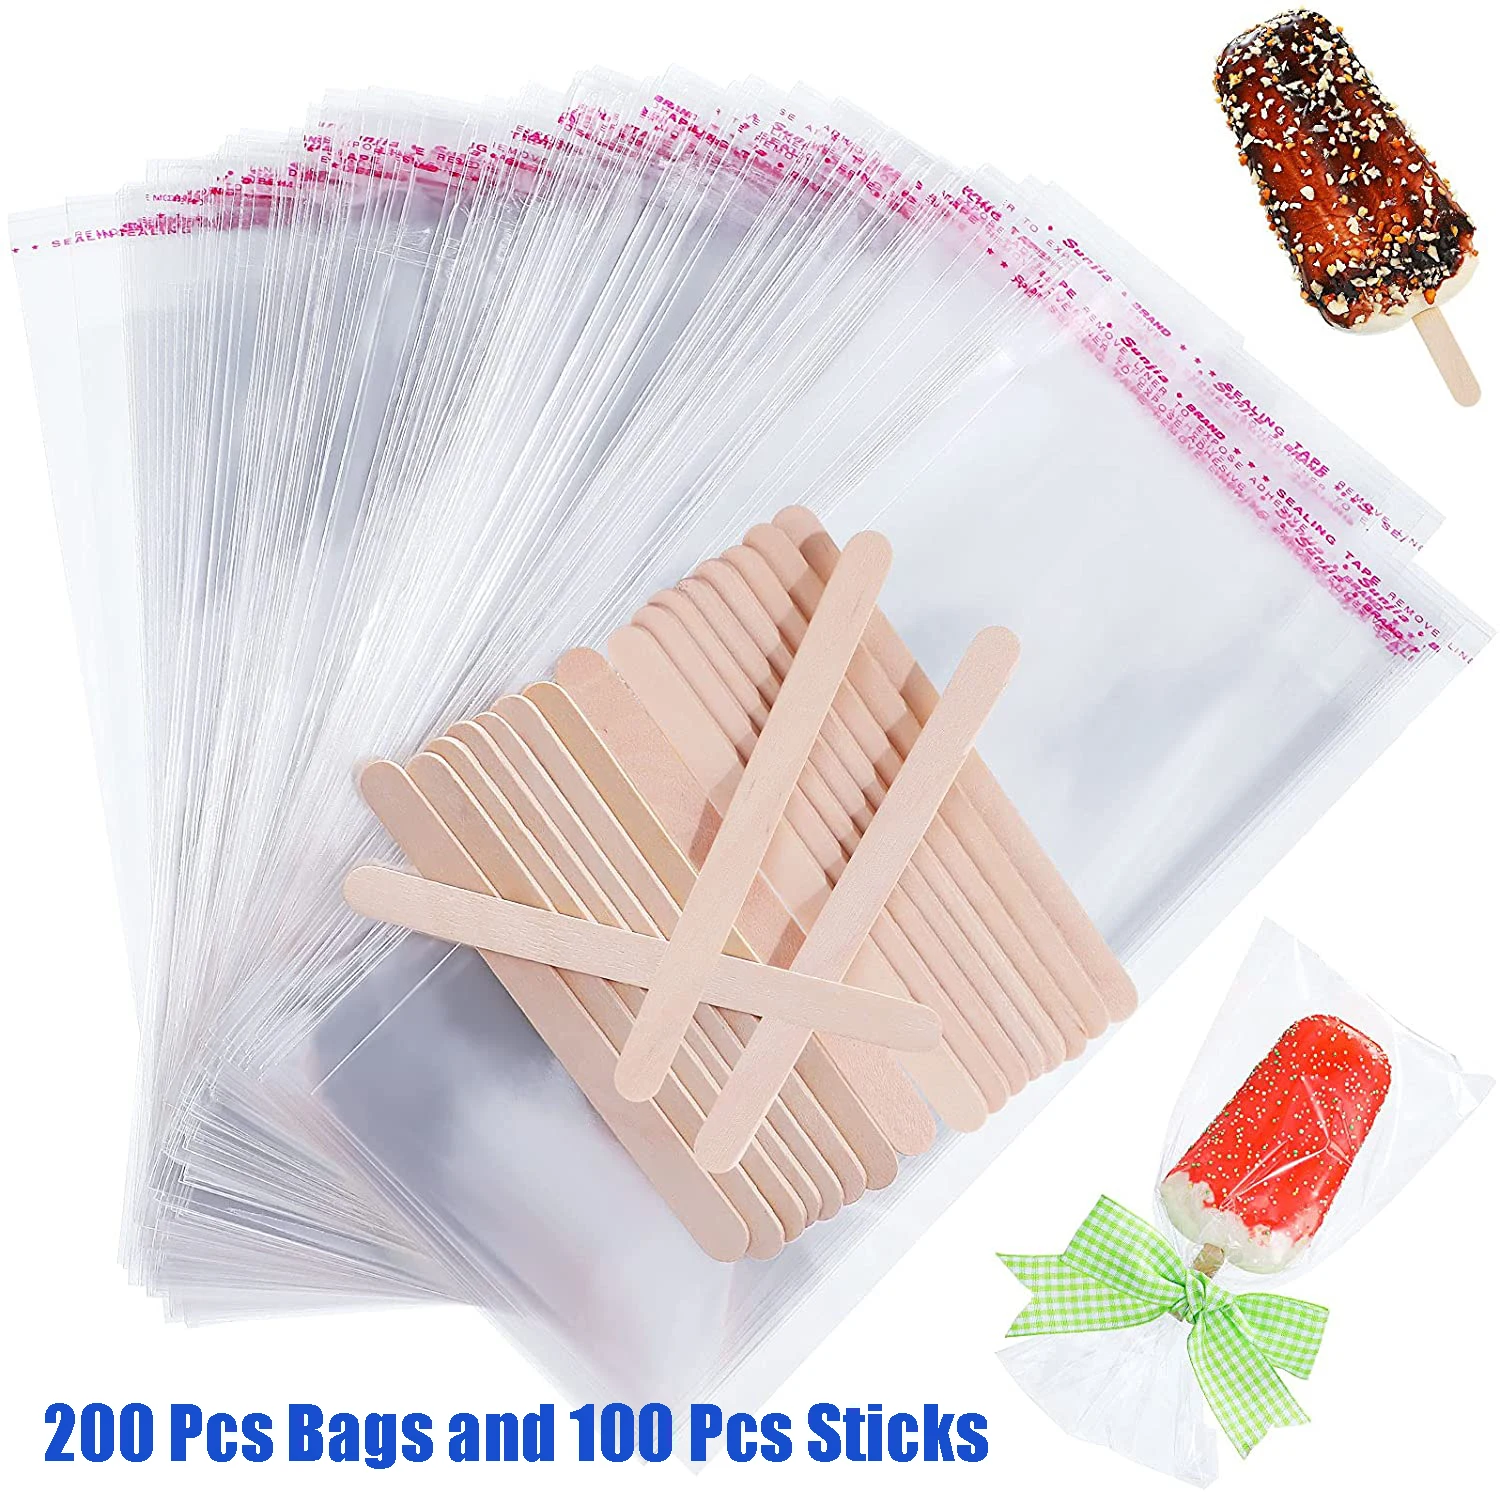 300 Pcs Popsicle Sticks and Pop Bags Set Ice Cream Clear Plastic Self-adhesive 8*20 cm Pouch with 11*1 cm Wooden Sticks